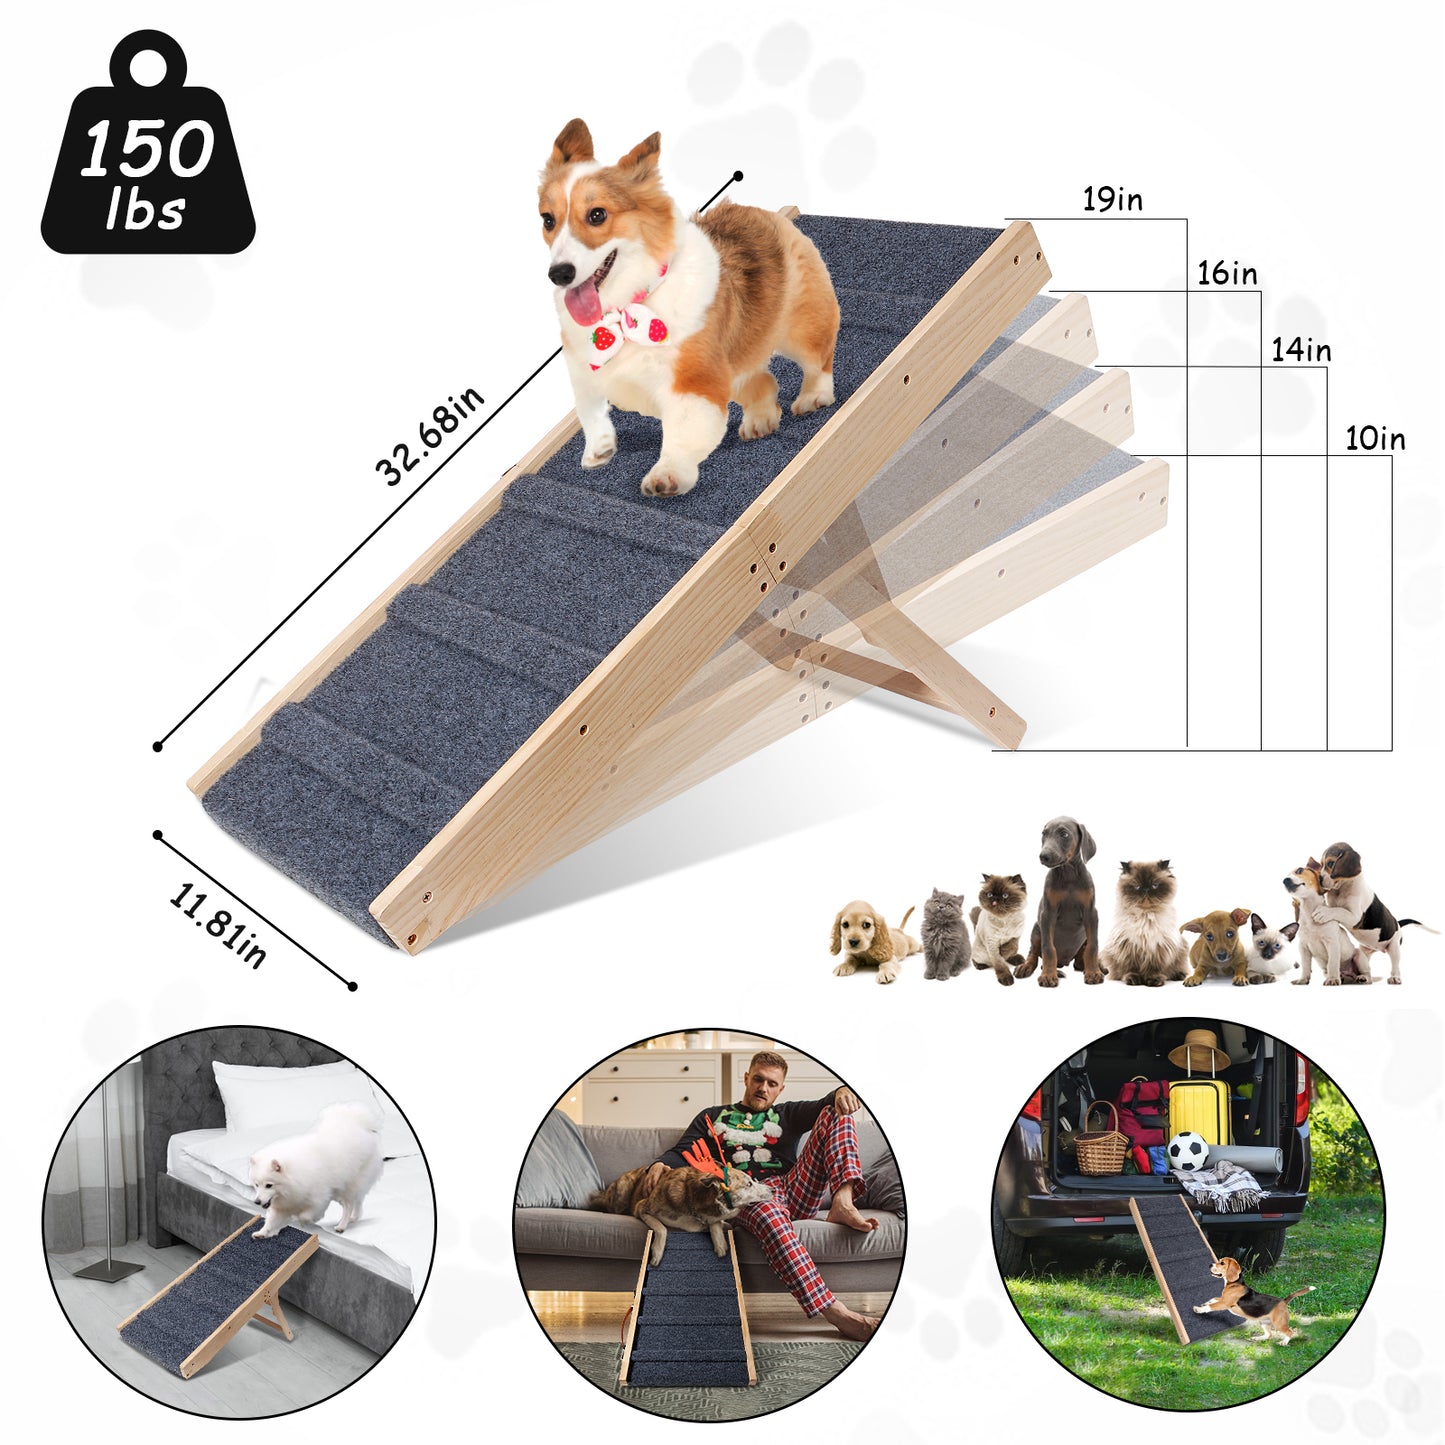 Dog Ramp, 32.6" Long and 11.8" Wide Wooden Folding Portable Pet Ramp, Adjustable from 10" to 19" with Non-Slip Traction Mat, Dog Ramps for Car, Bed, Couch, Rated for 30 LBS(Light Grey)